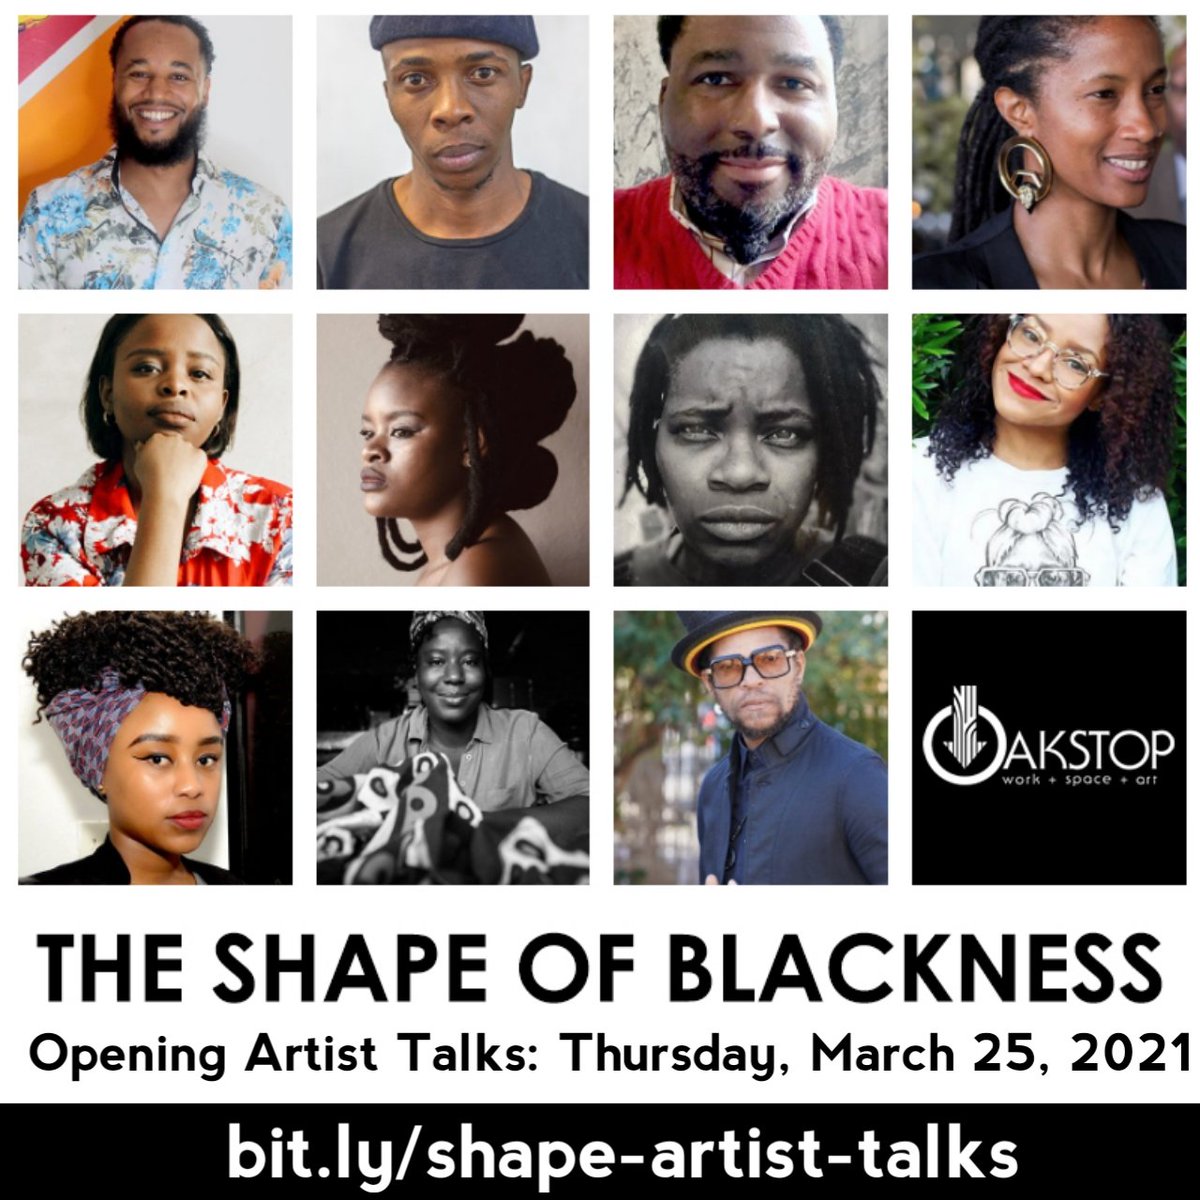 THANKS for supporting our virtual exhibition, shapeofblackness.com! Check out the South African & US artists in conversation on March 25th! Bit.ly/shape-artist-t… #blackart #southafricanart #shapeofblackness #contemporaryart